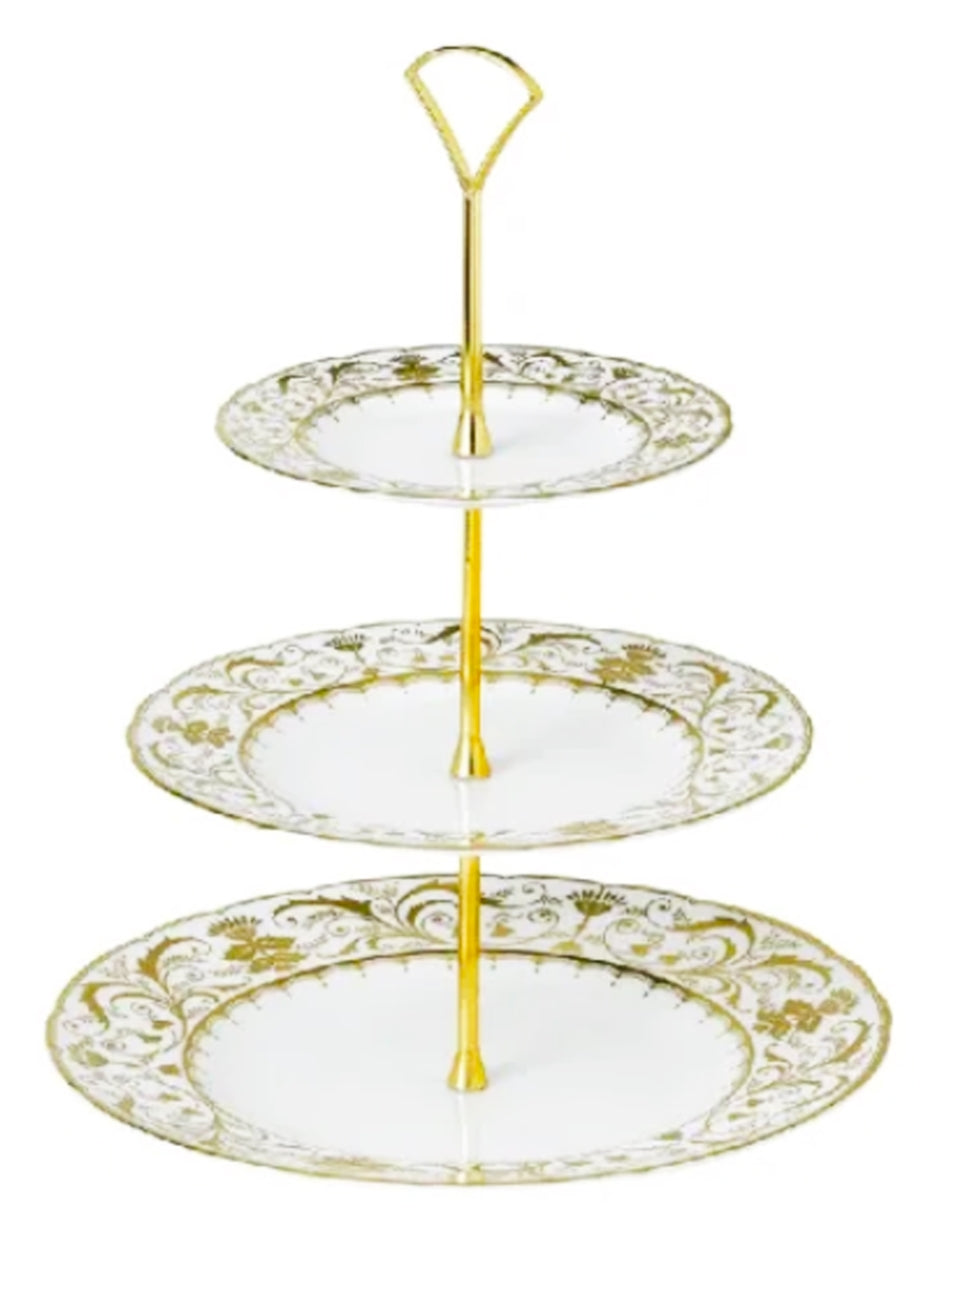 Darley Abbey White 3 Tier Cake Stand